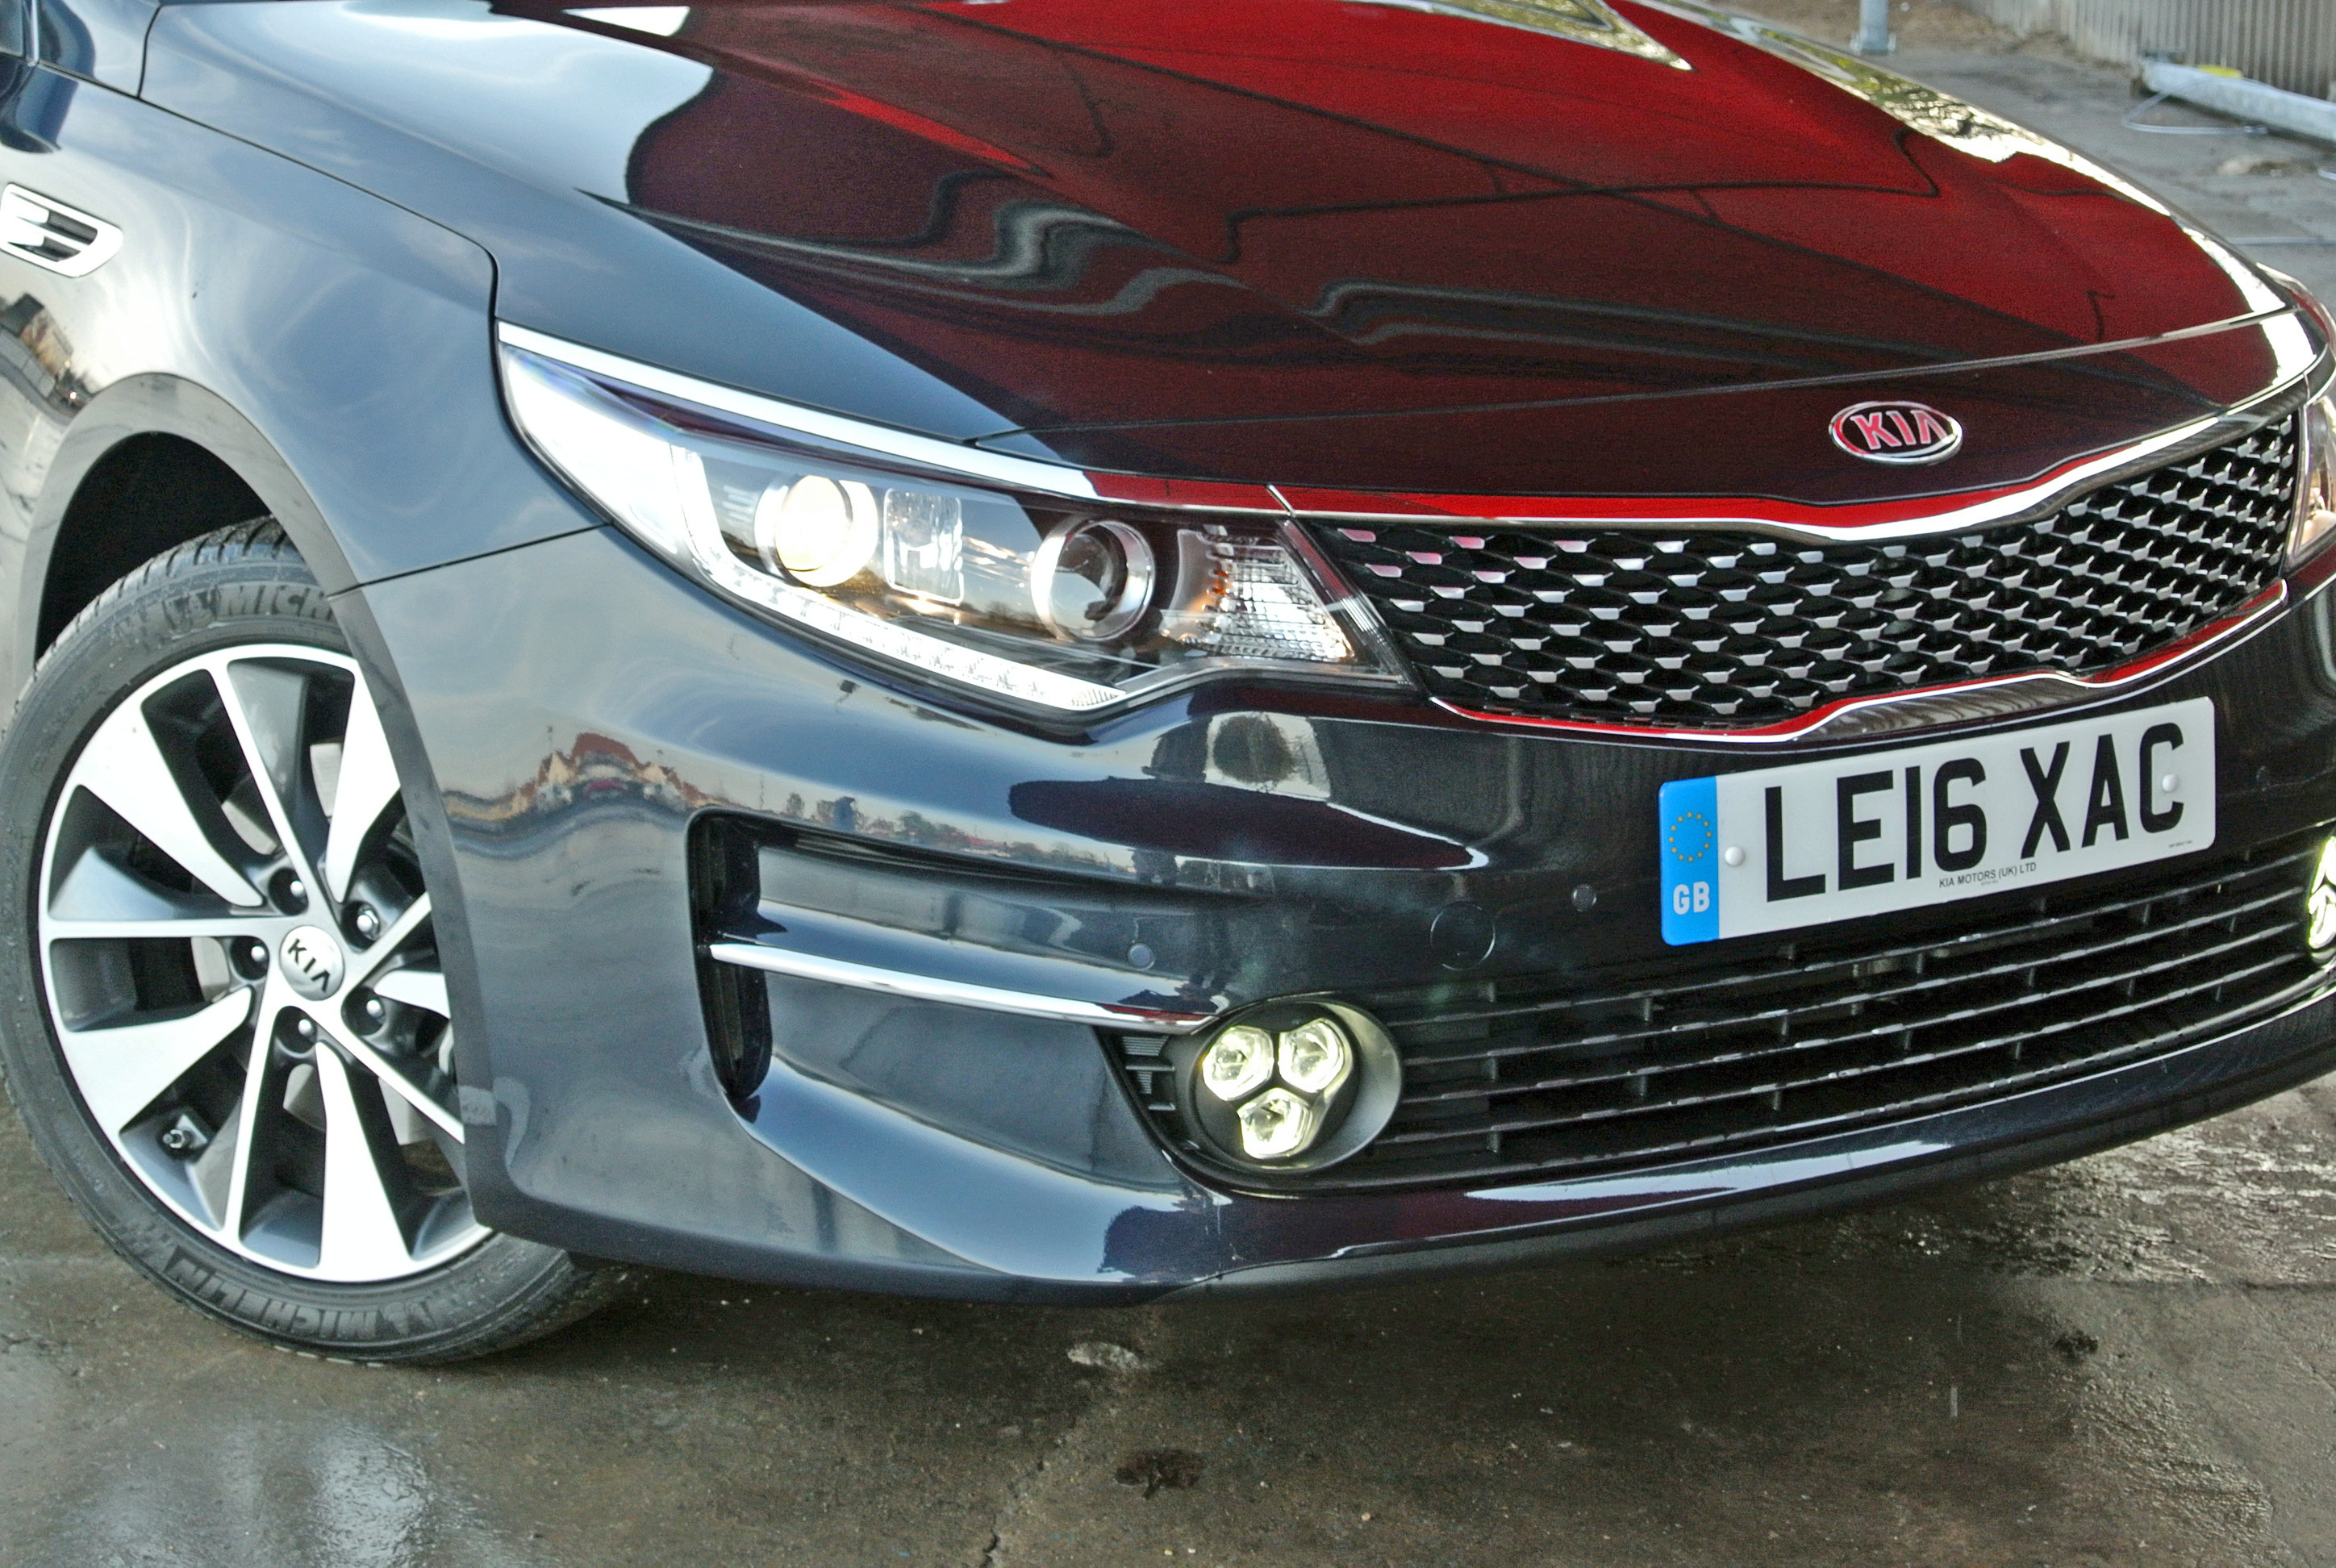 The Kia Optima shows its better engineered SW dimensions